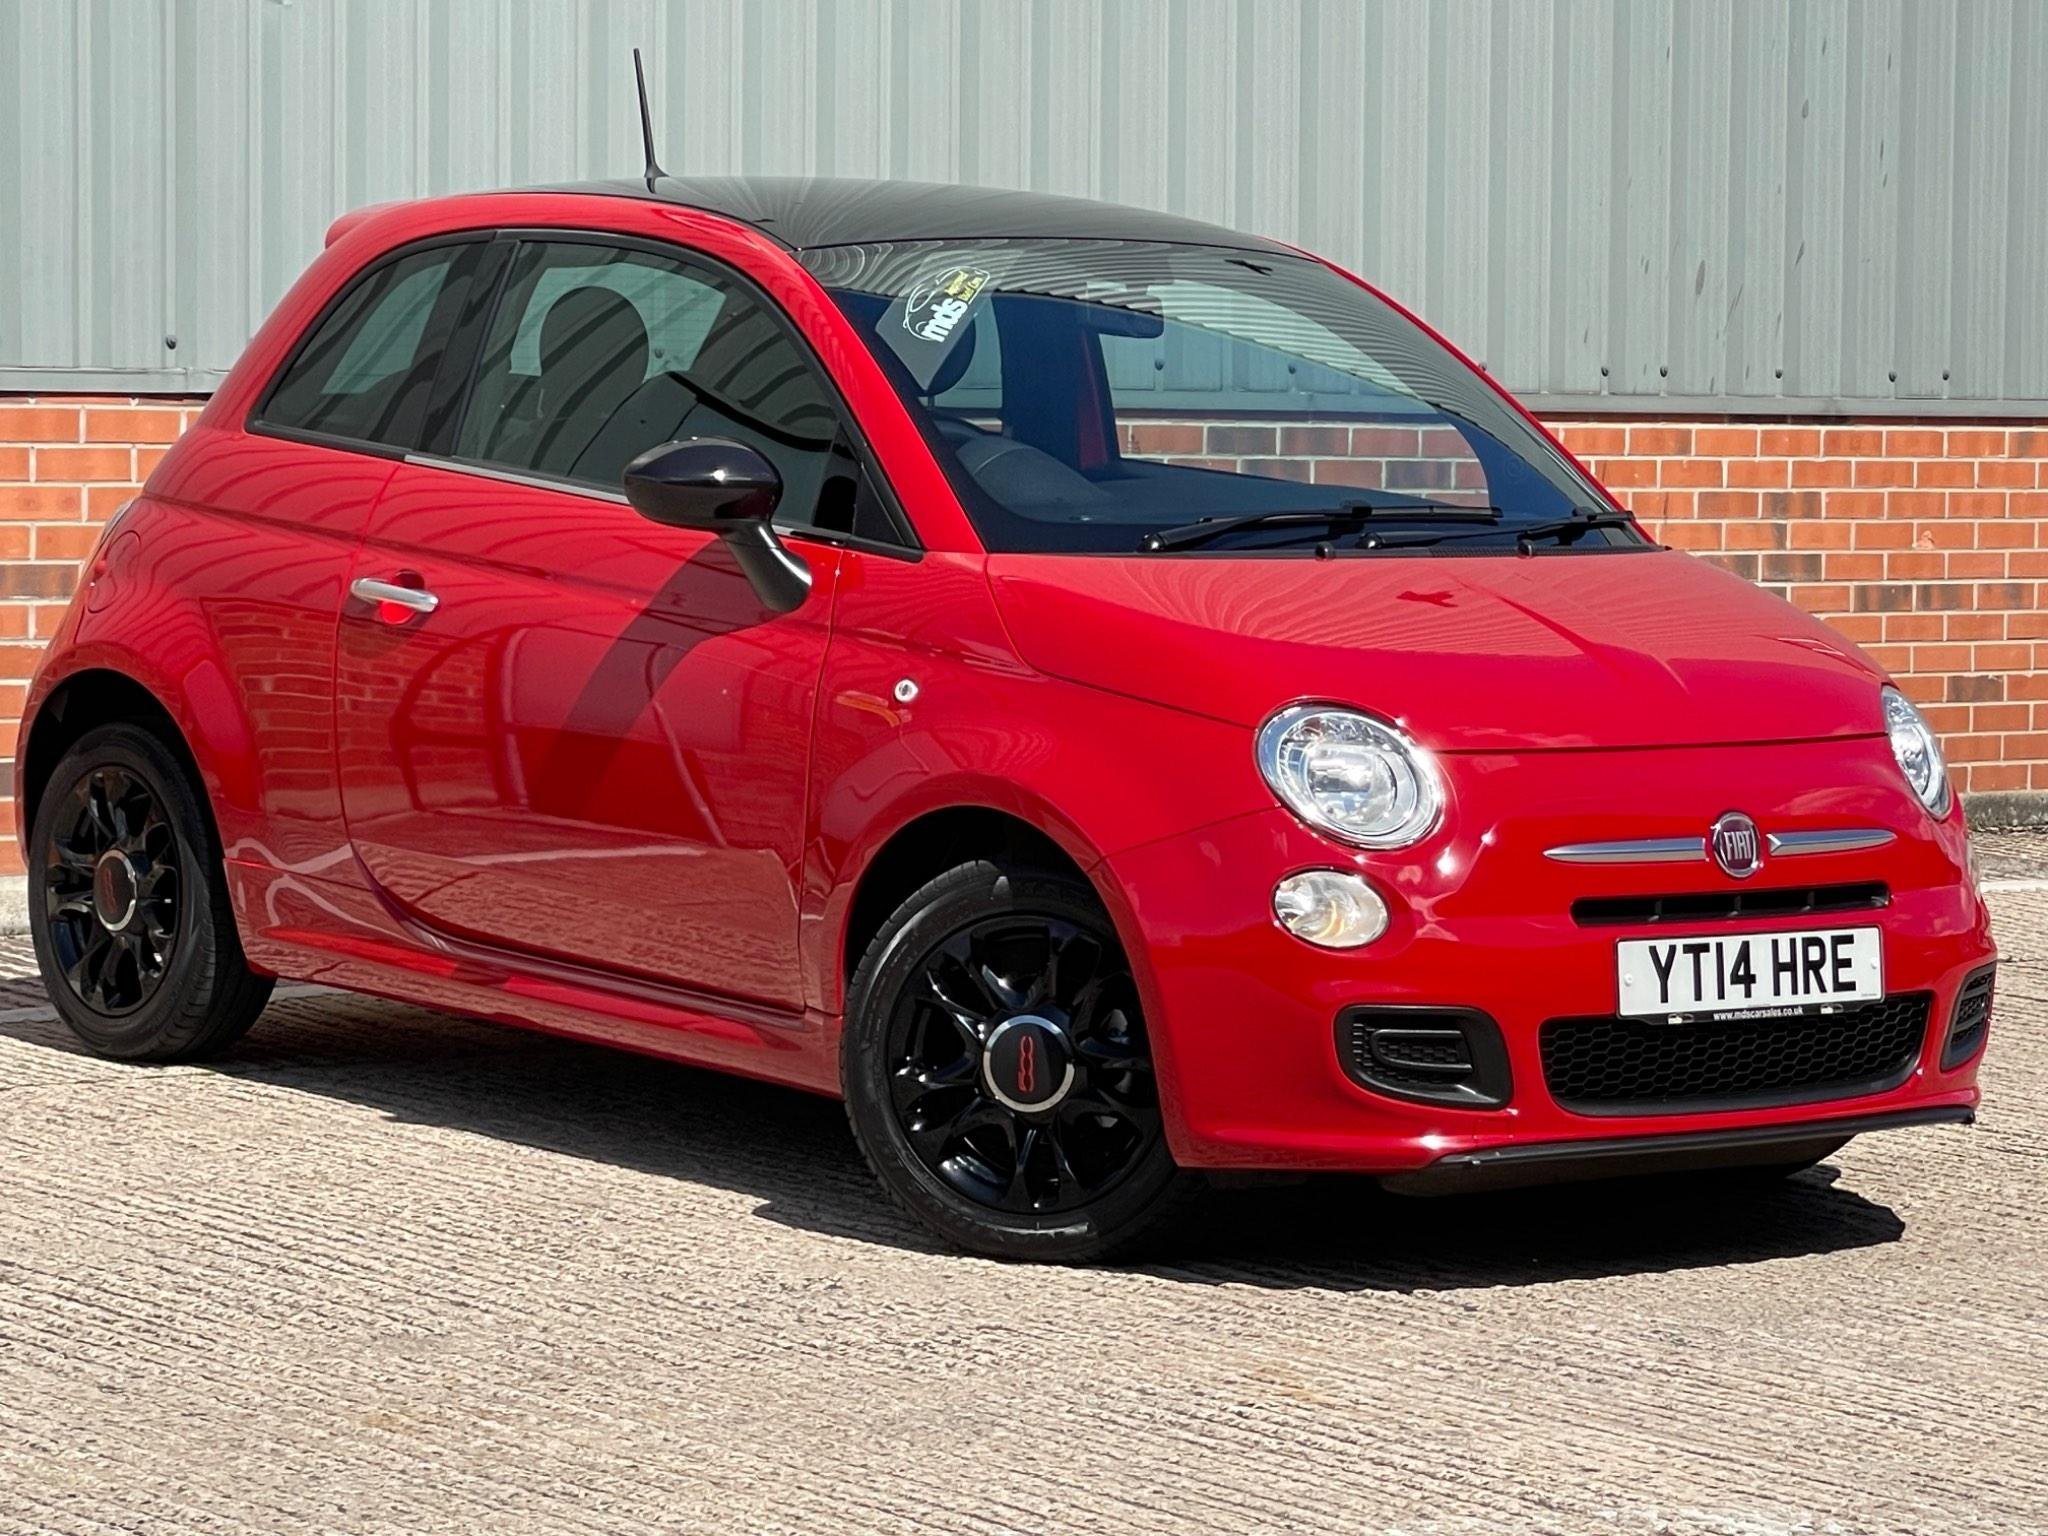 Used Fiat 500 1.2 S Euro 6 (s/s) 3dr 2014 3dr Manual (YT14HRE)